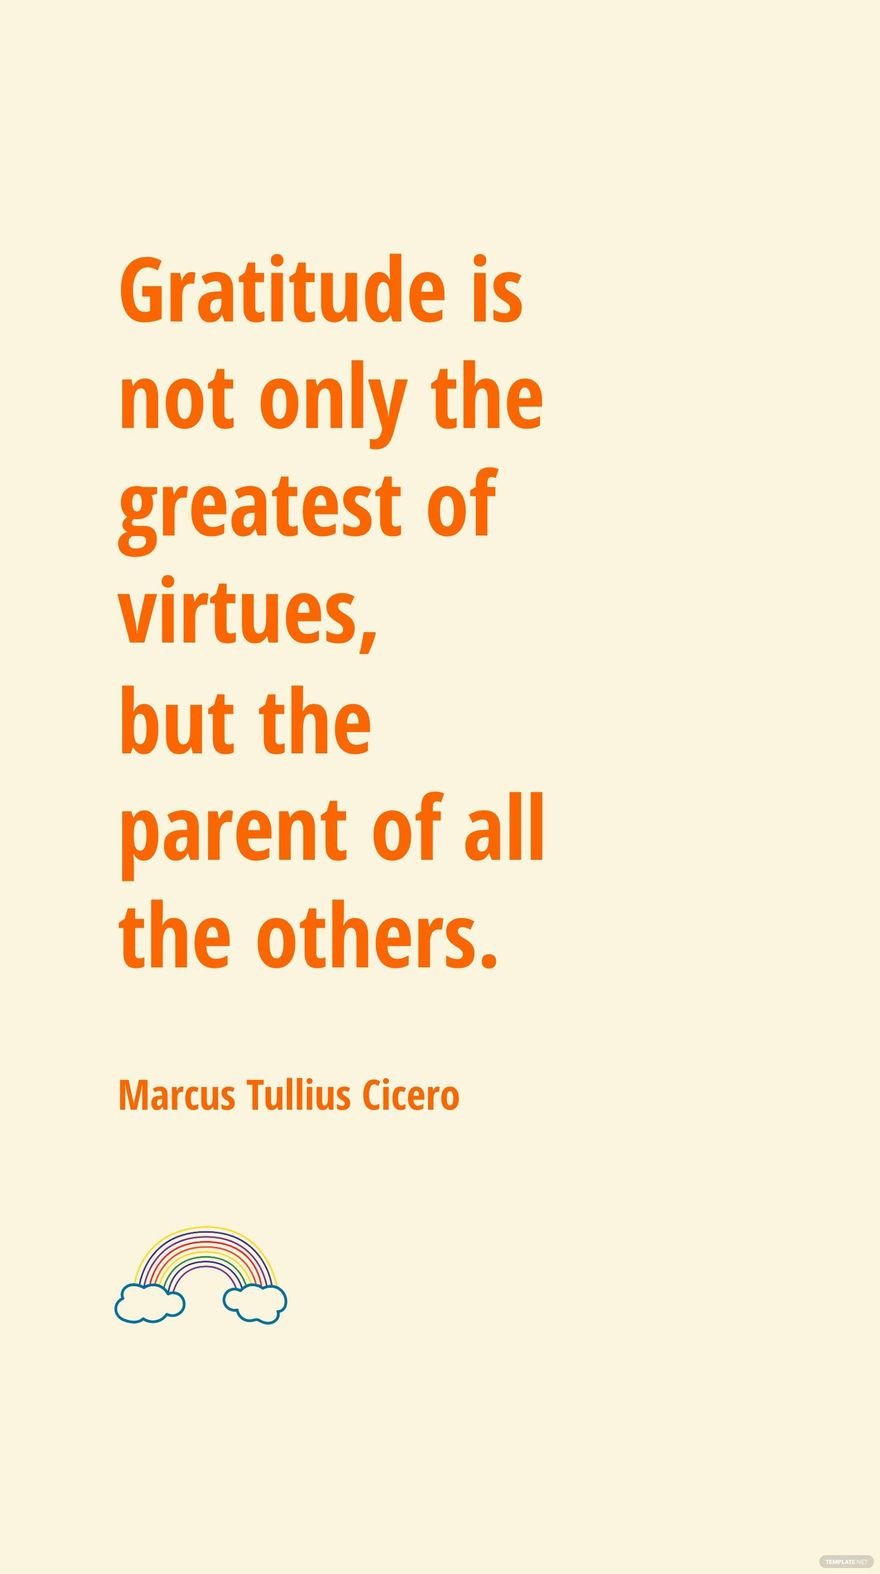 Marcus Tullius Cicero - Gratitude is not only the greatest of virtues, but the parent of all the others. in JPG